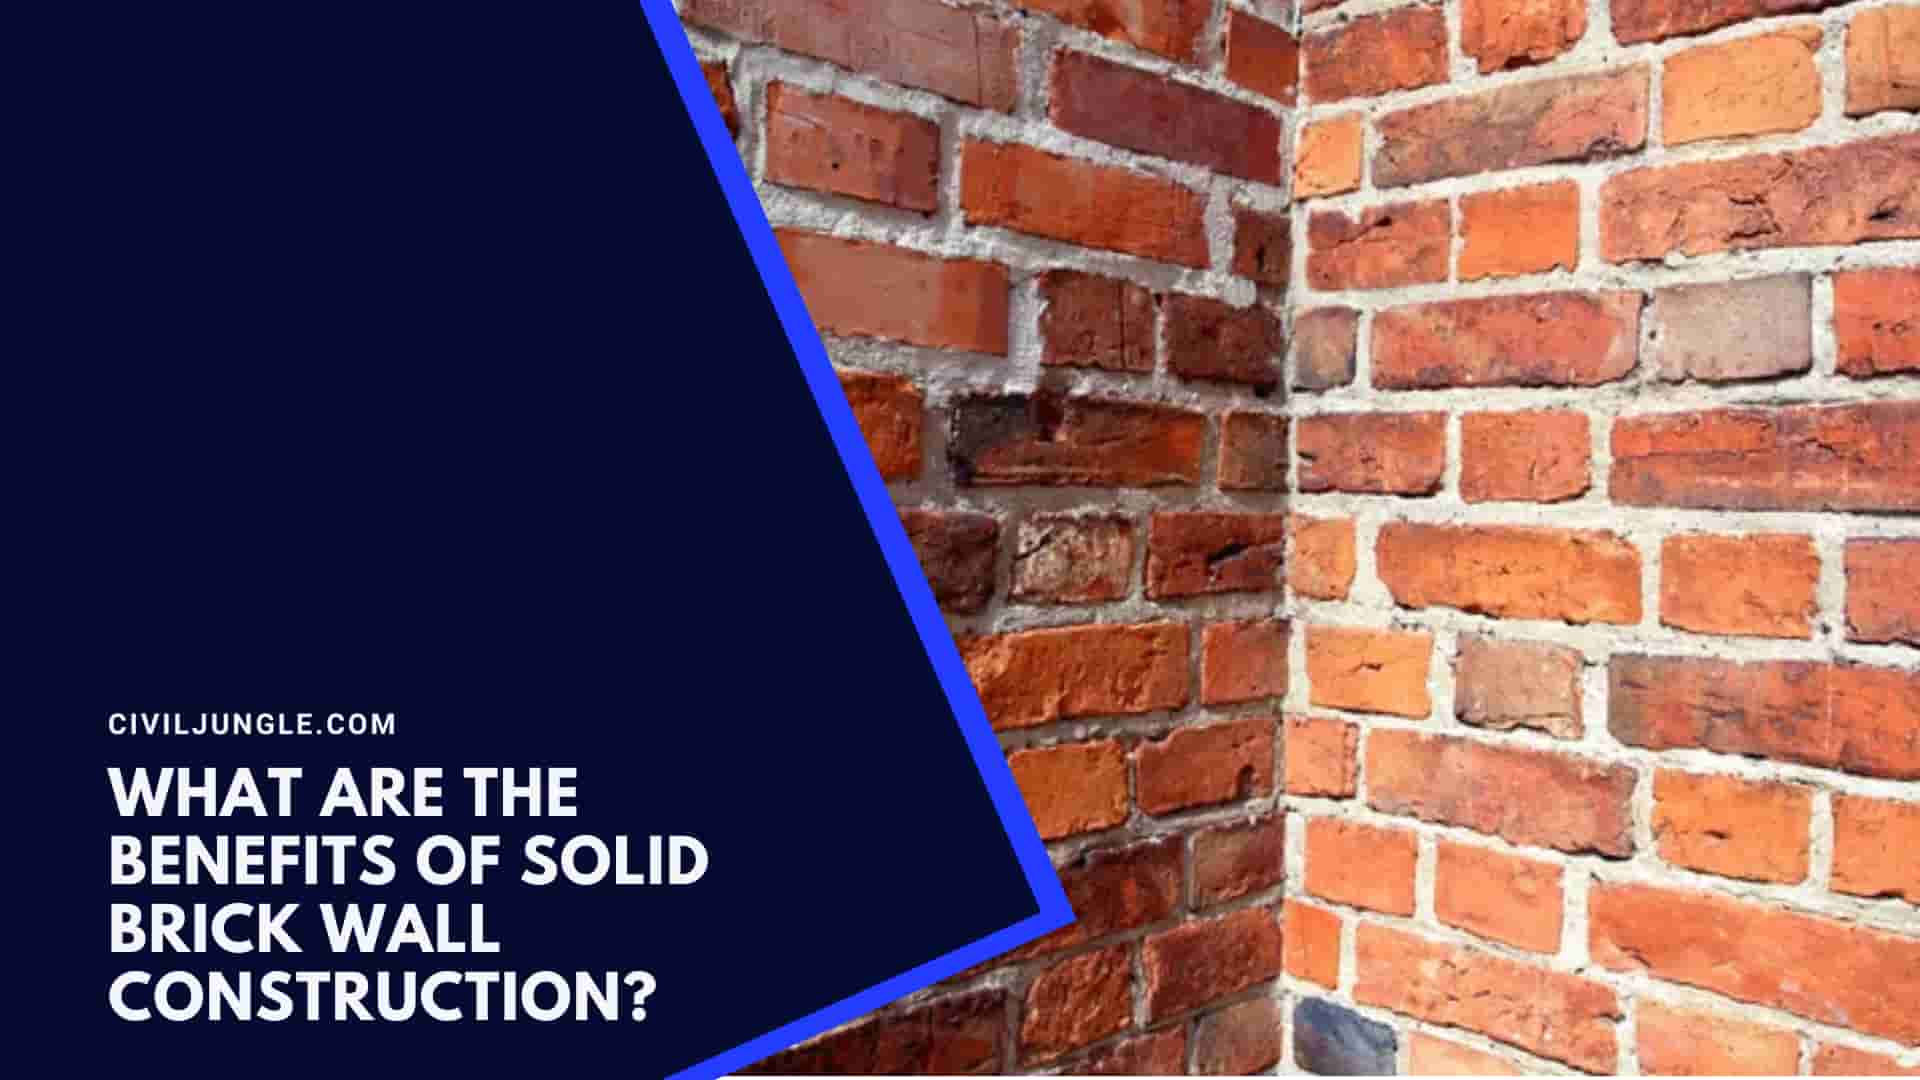 What Are The Benefits Of Solid Brick Wall Construction?